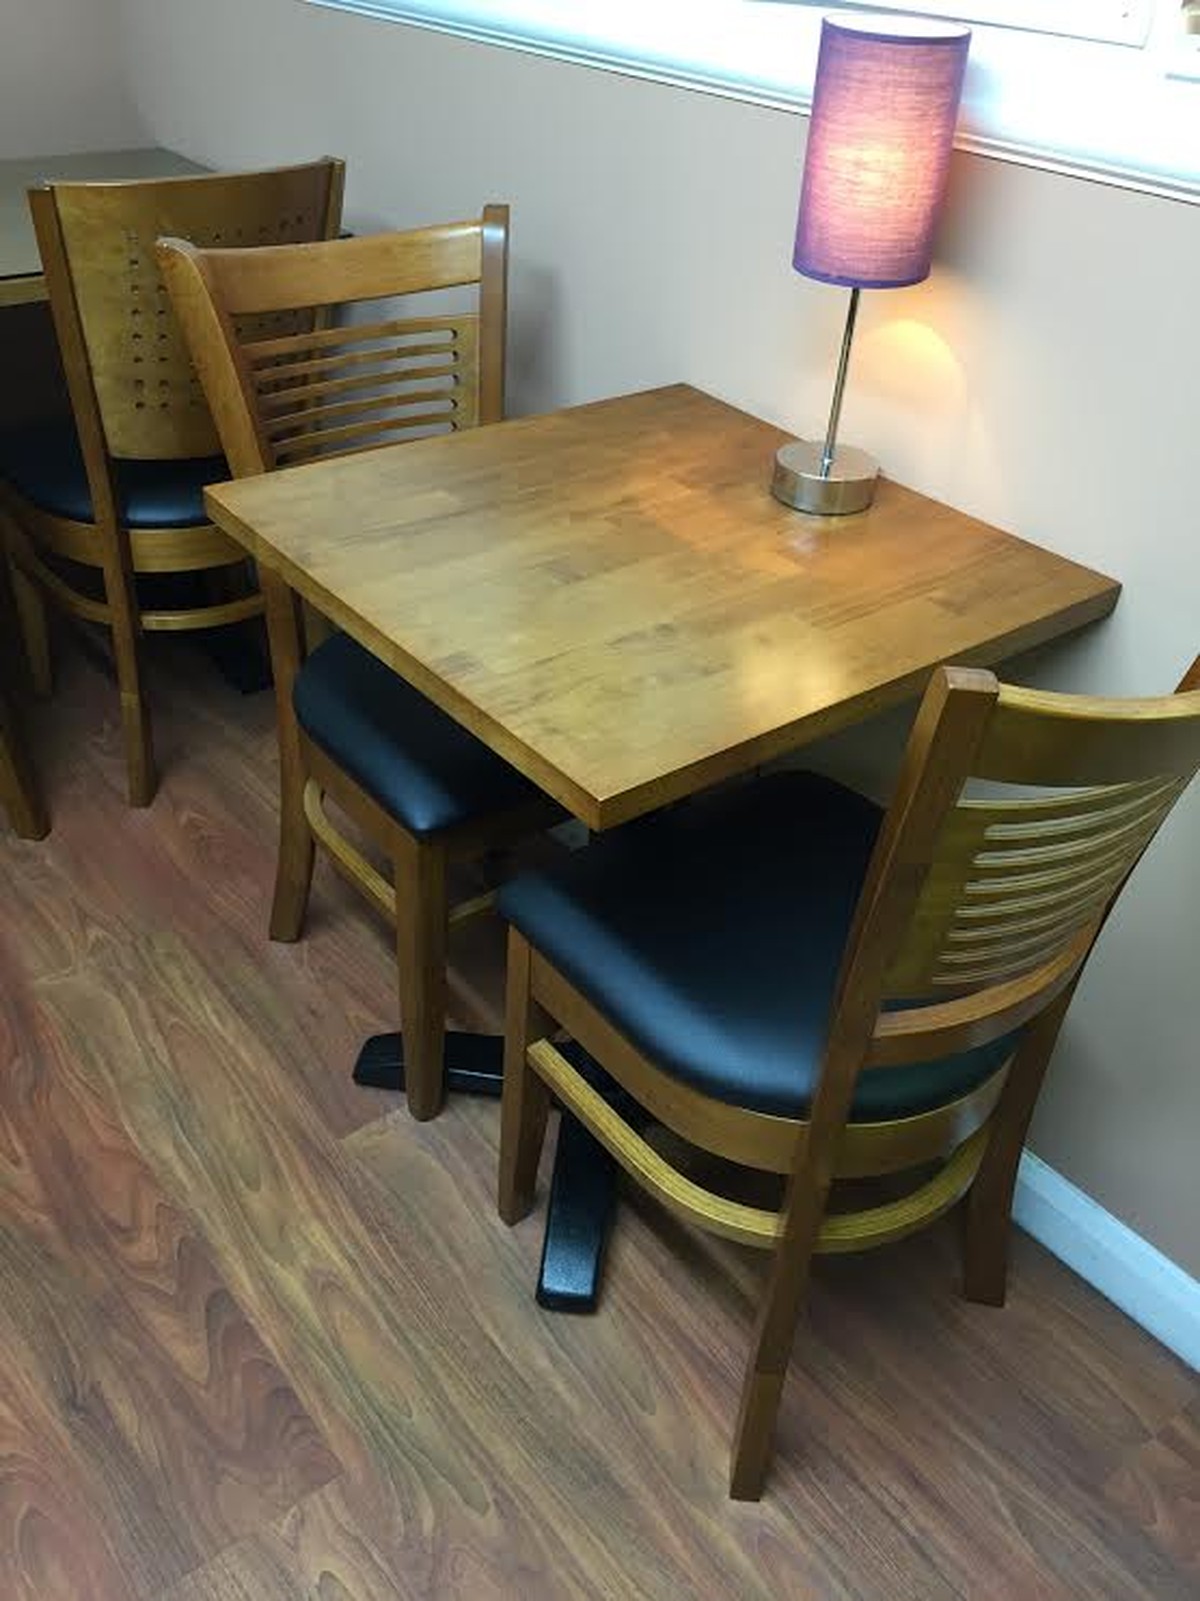 Secondhand Chairs and Tables | Restaurant or Cafe Tables | NEW Solid